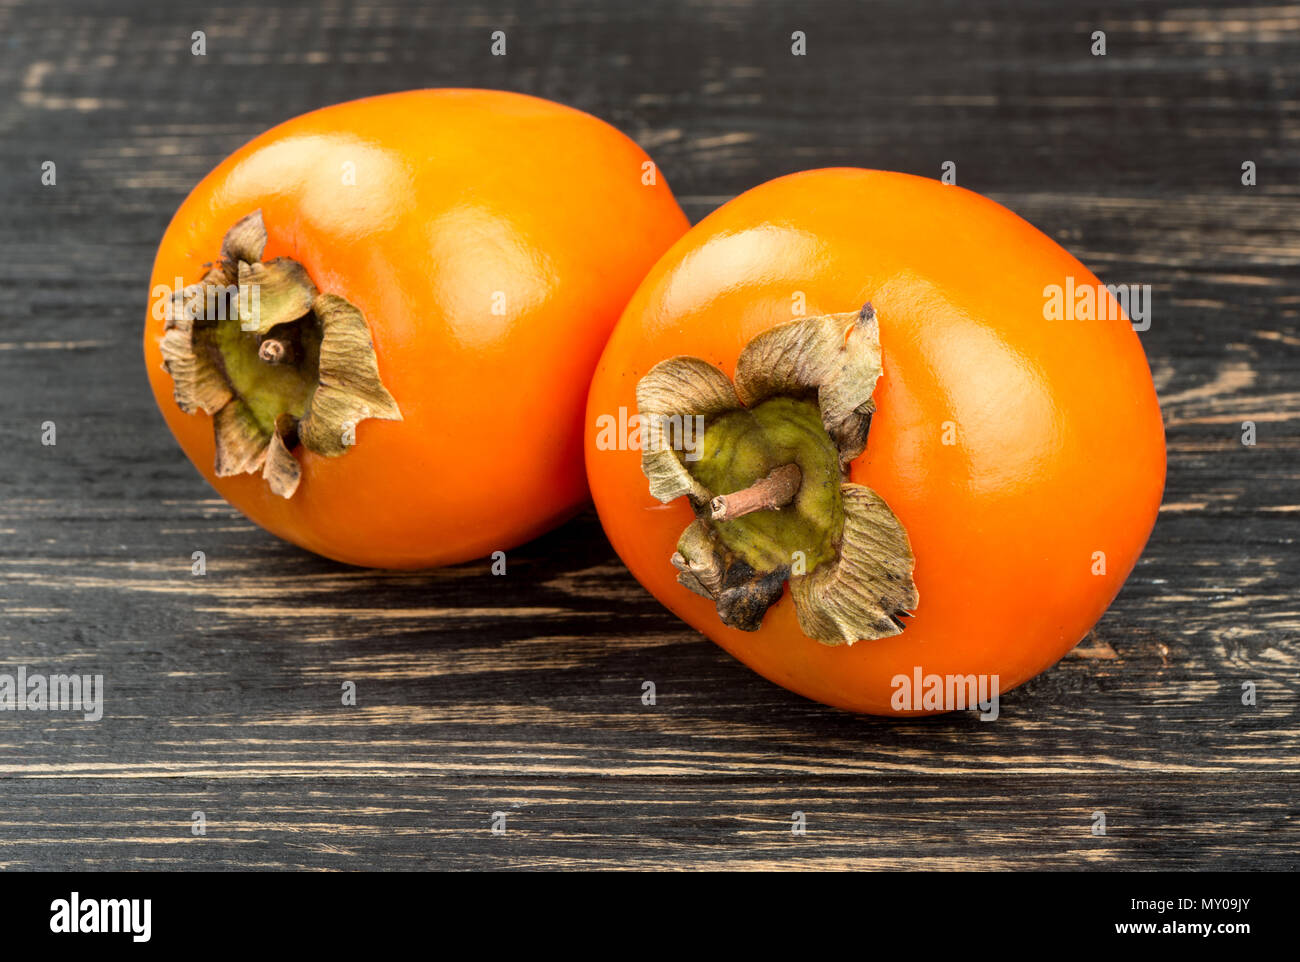 Fruit two ripe persimmons on wooden background closeup Stock Photo